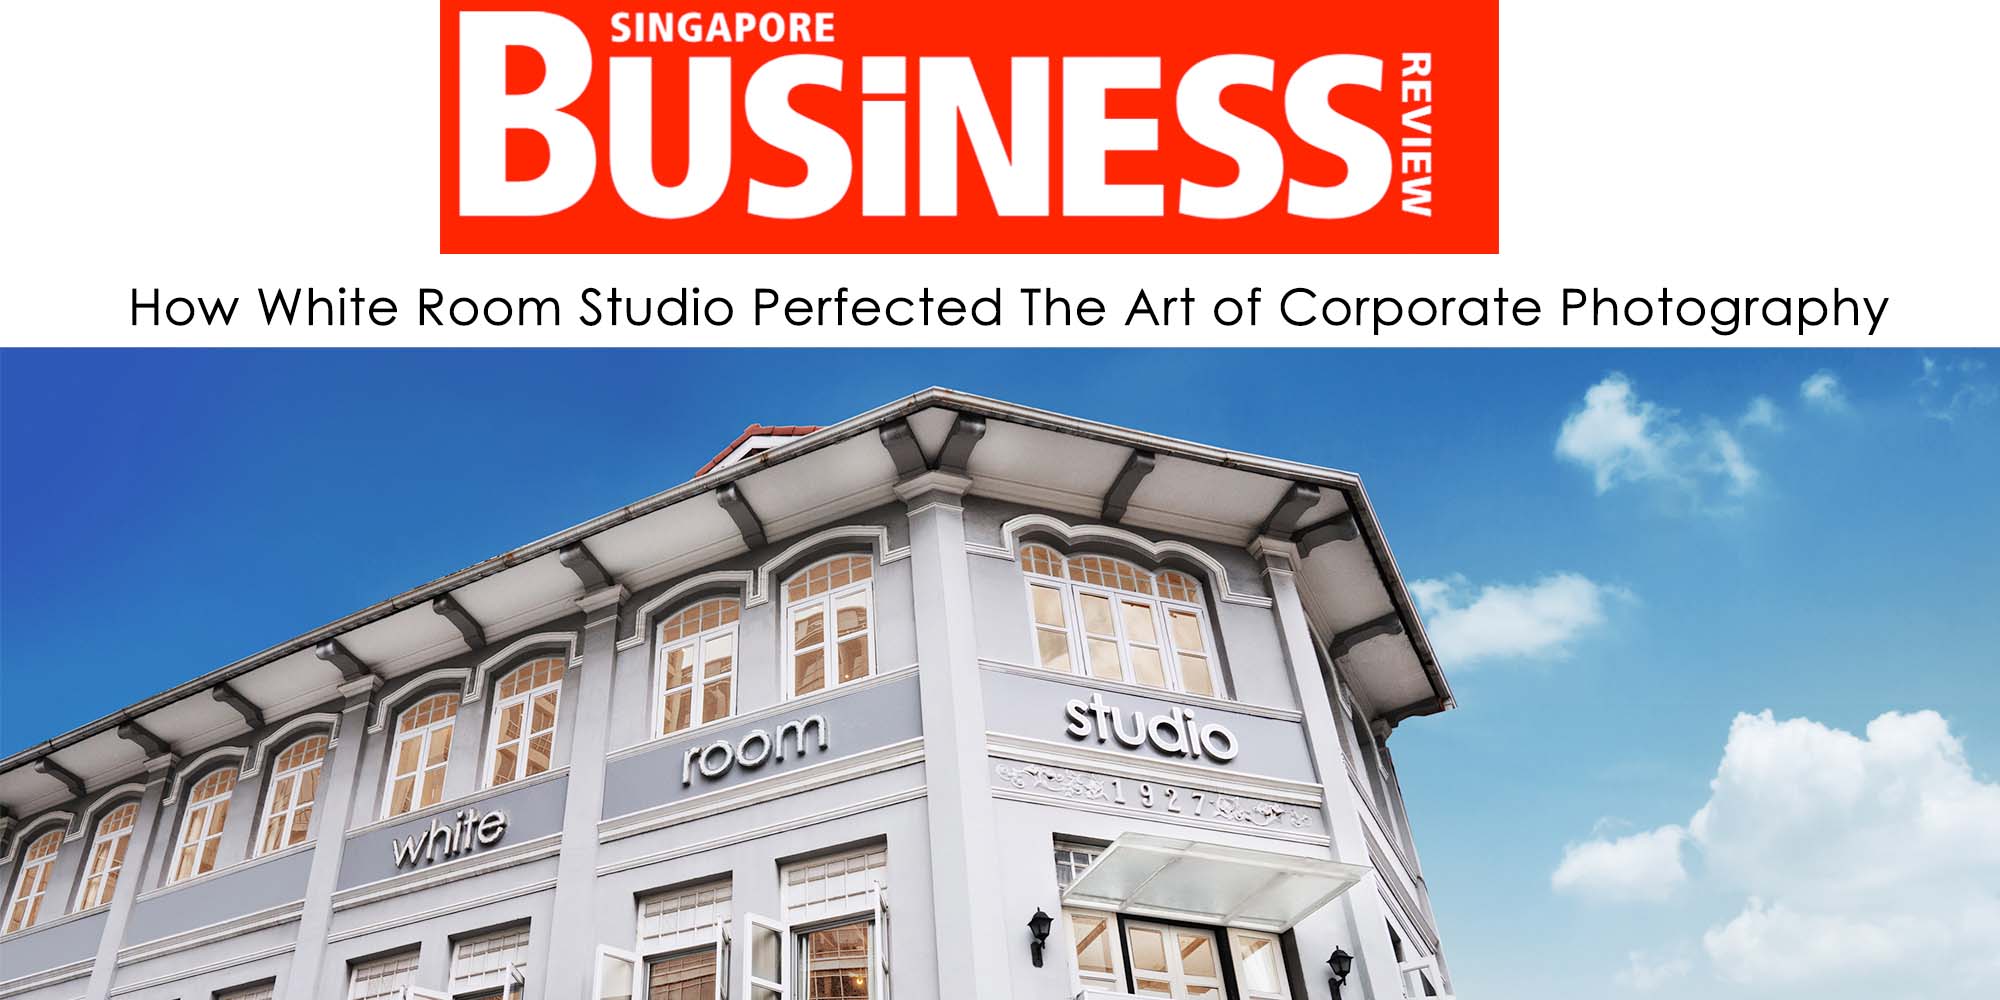 Singapore Business Review 2022 - How White Room Studio Perfected the Art of Corporate Photography